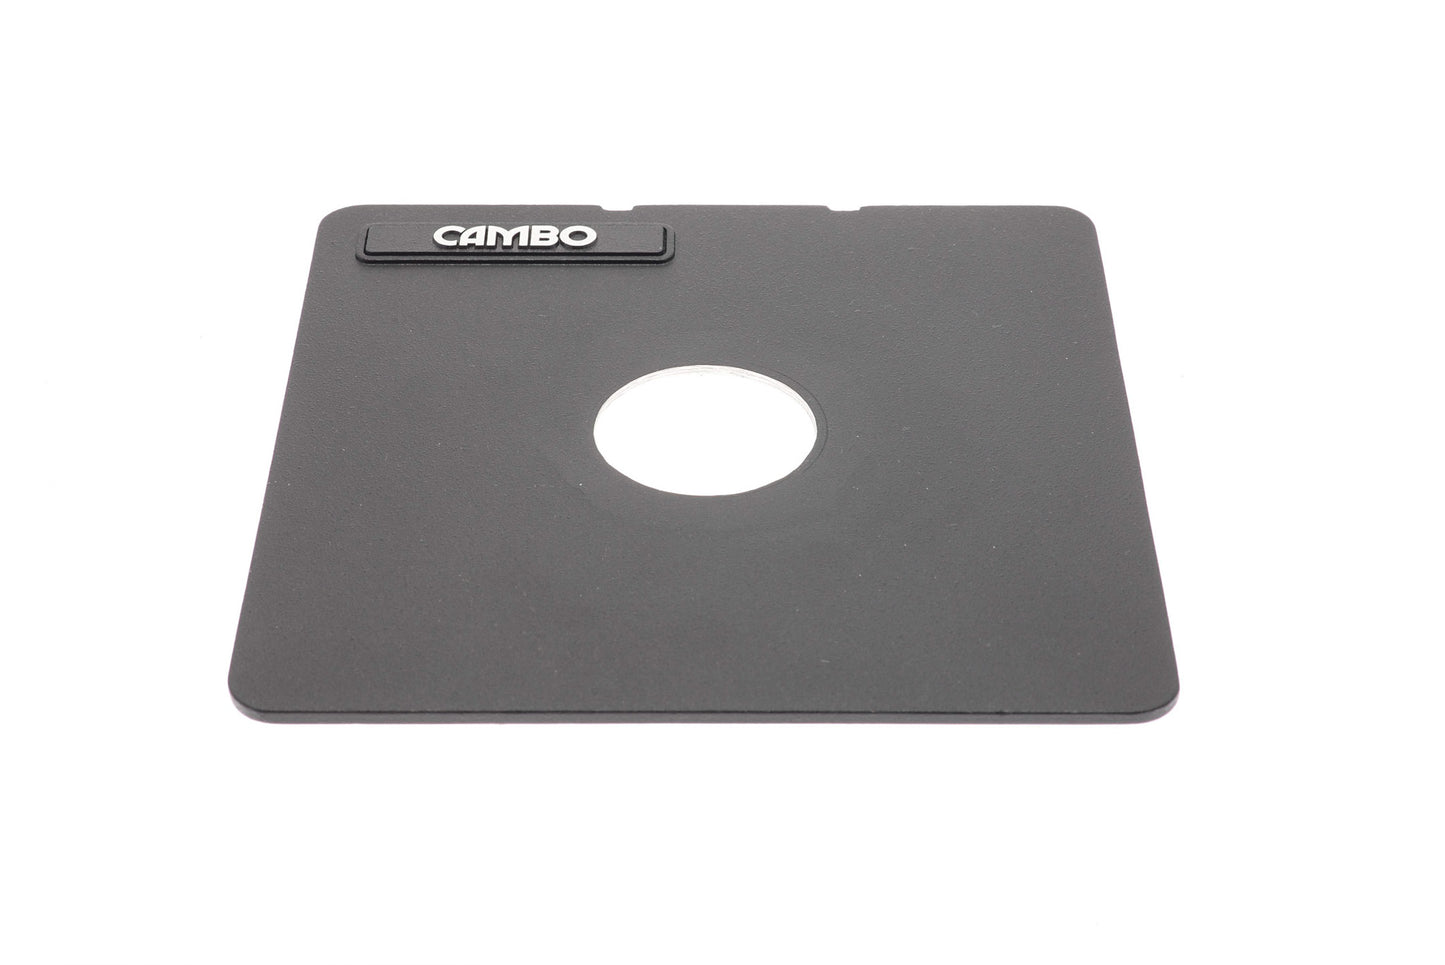 Cambo C-224 Lens Board 163mm x 163mm with Custom Hole - Accessory